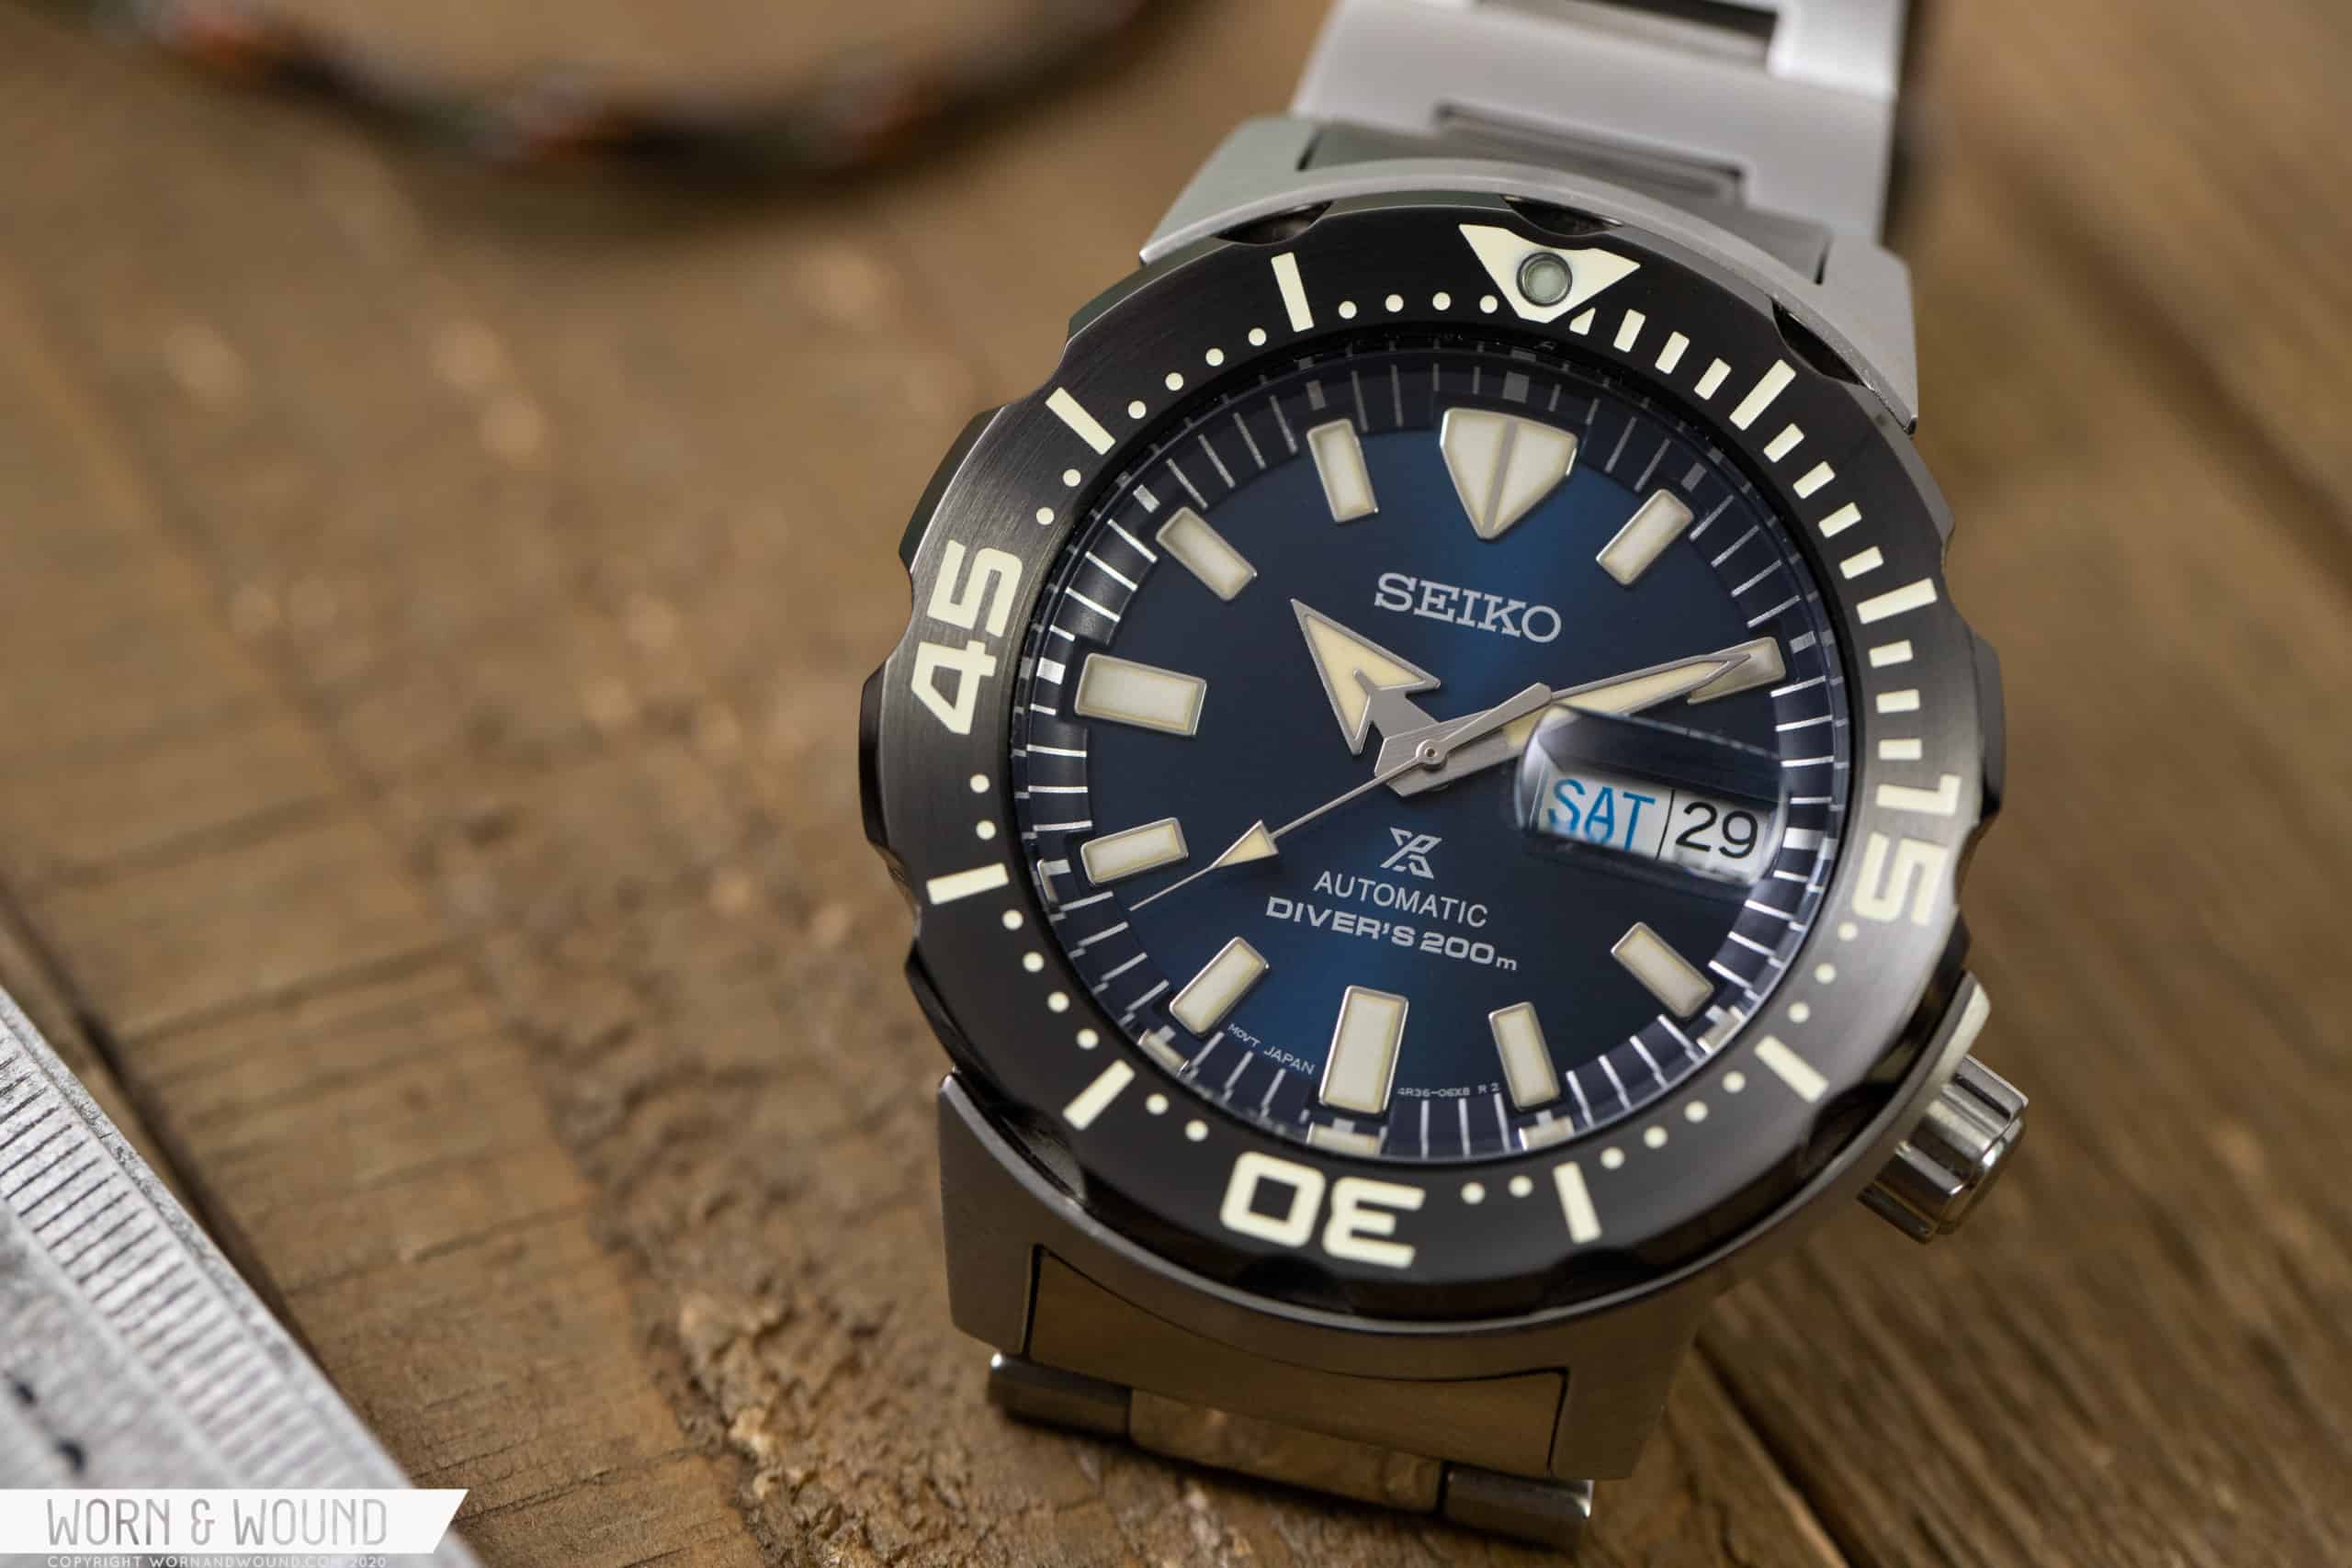 kubiske Arctic brysomme Review: Seiko "Monster" SRPD25 - Worn & Wound